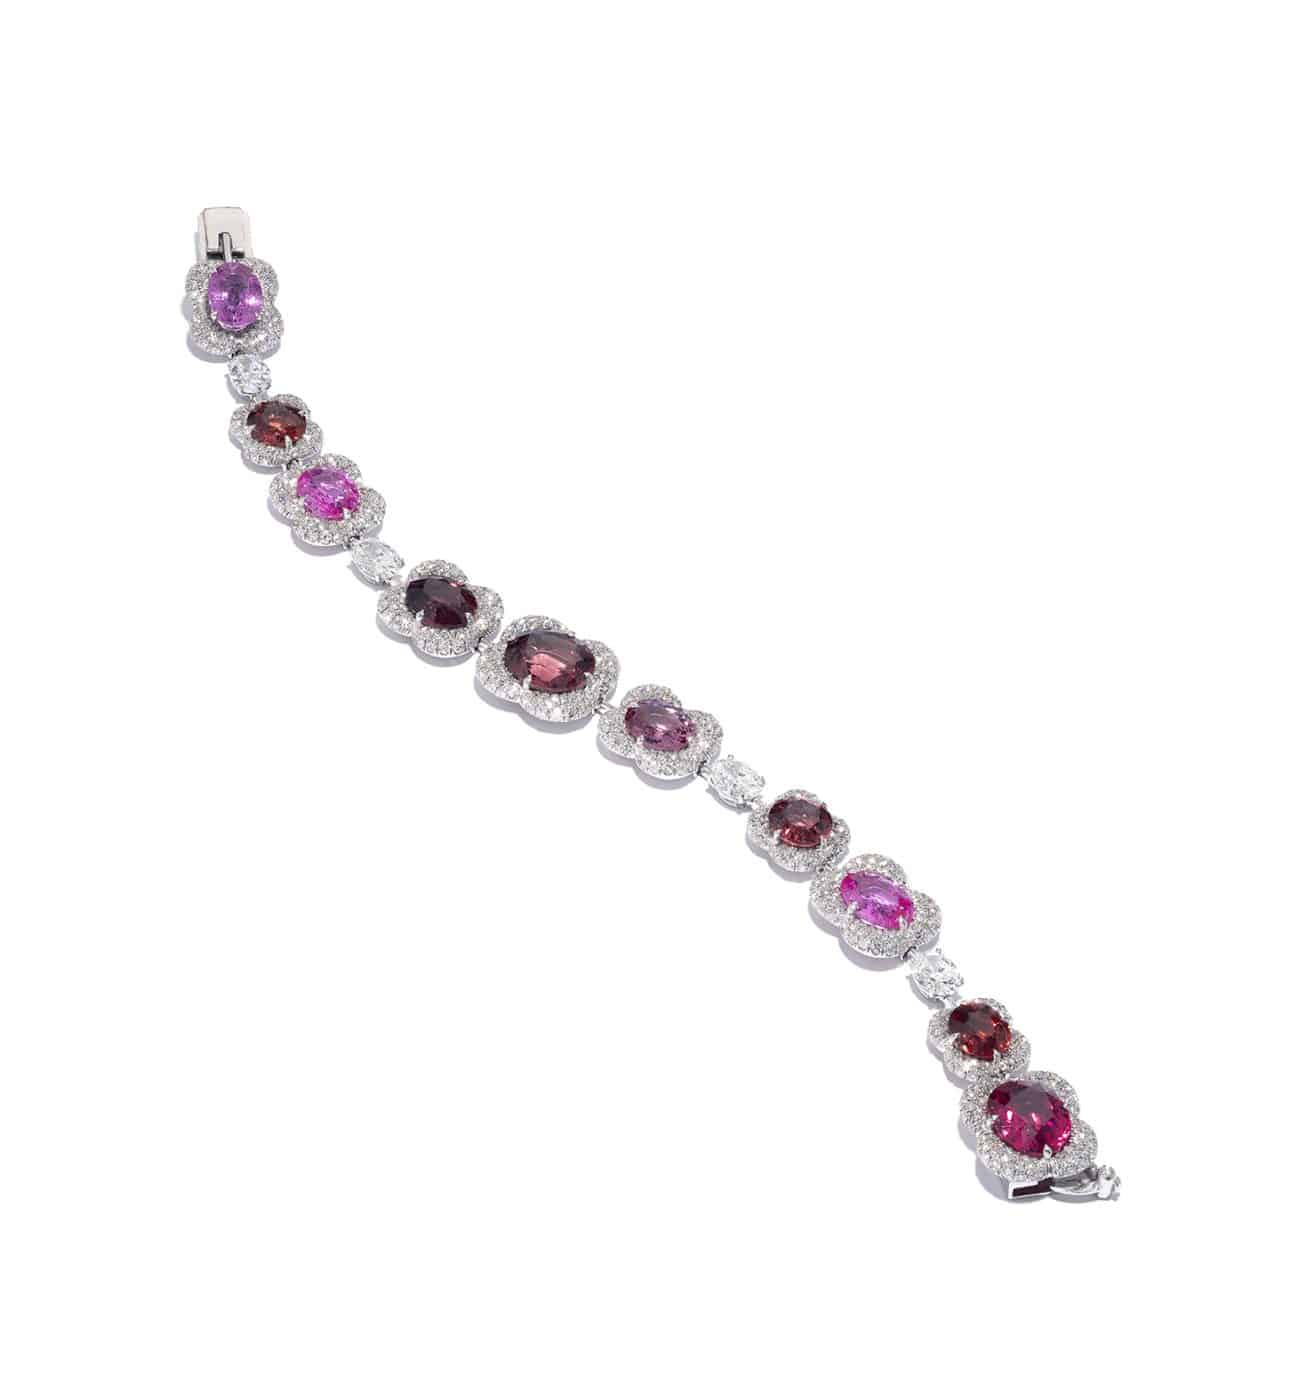 Pink and purple spinel and white diamond bracelet, 2009